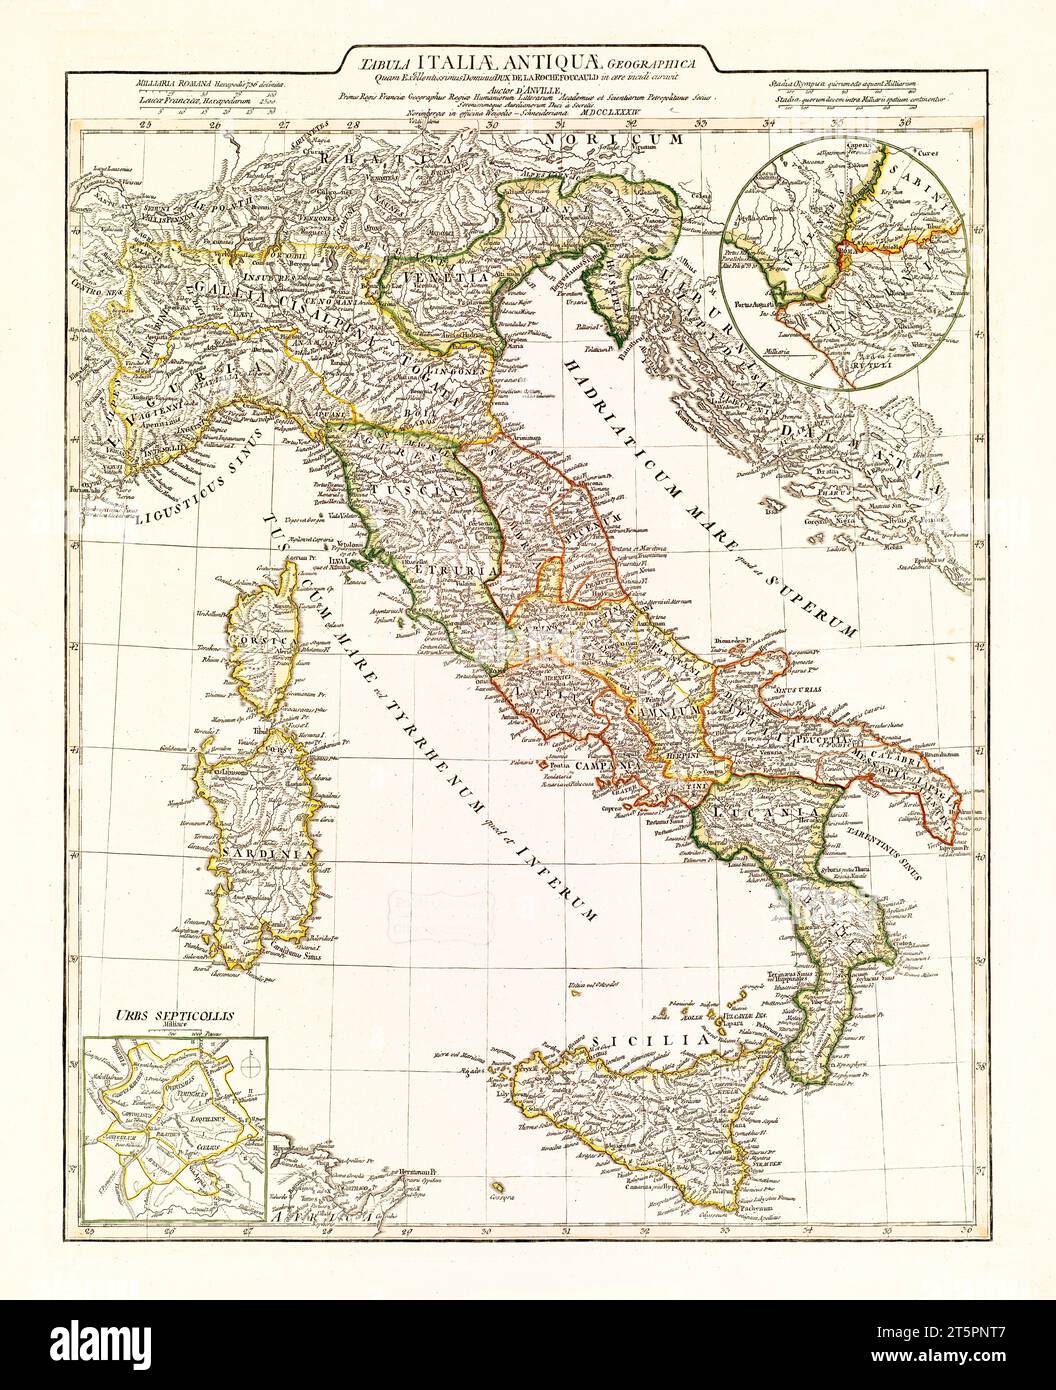 Old map of Italy. By D'Anville, publ. in 1784 Stock Photo